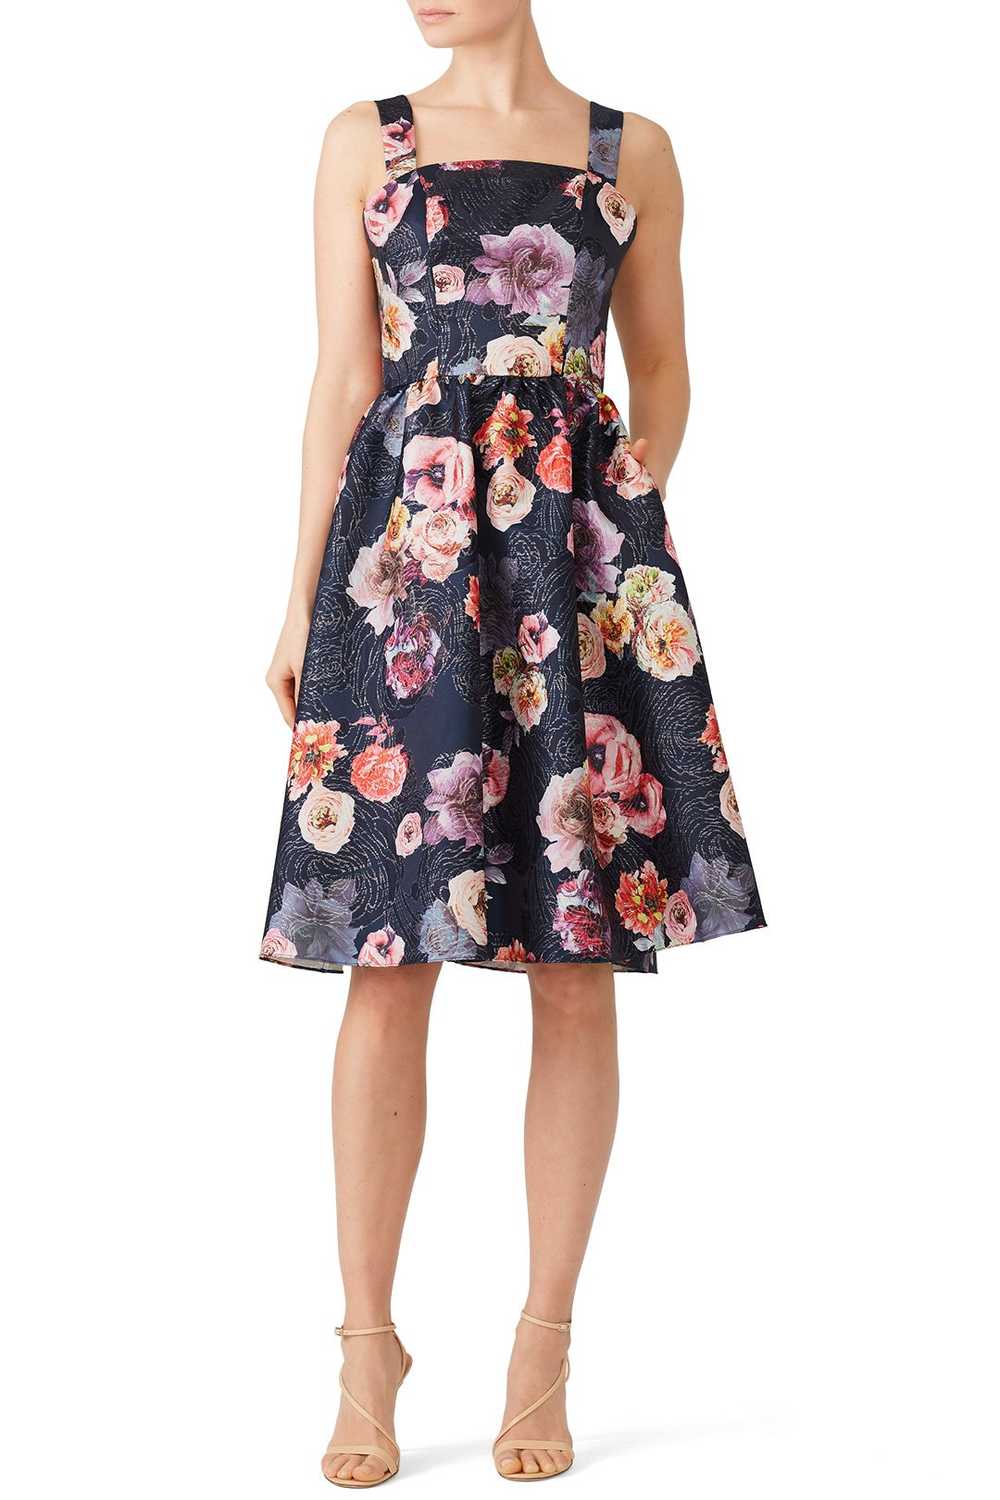 Christian Siriano Black Floral Cocktail Dress - image 1